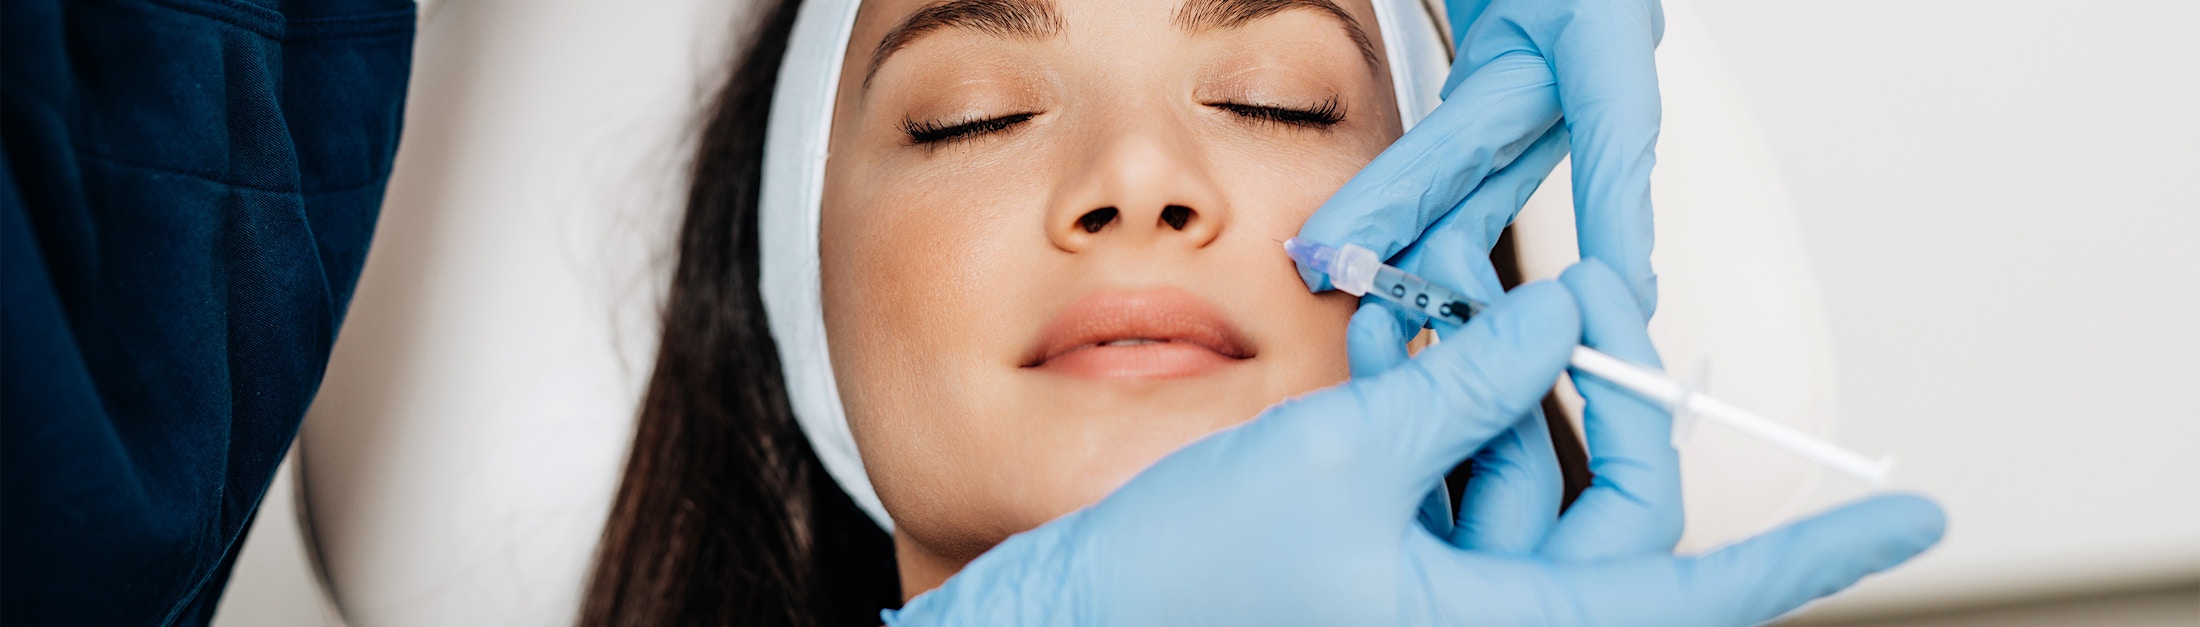 woman getting injectables treatment